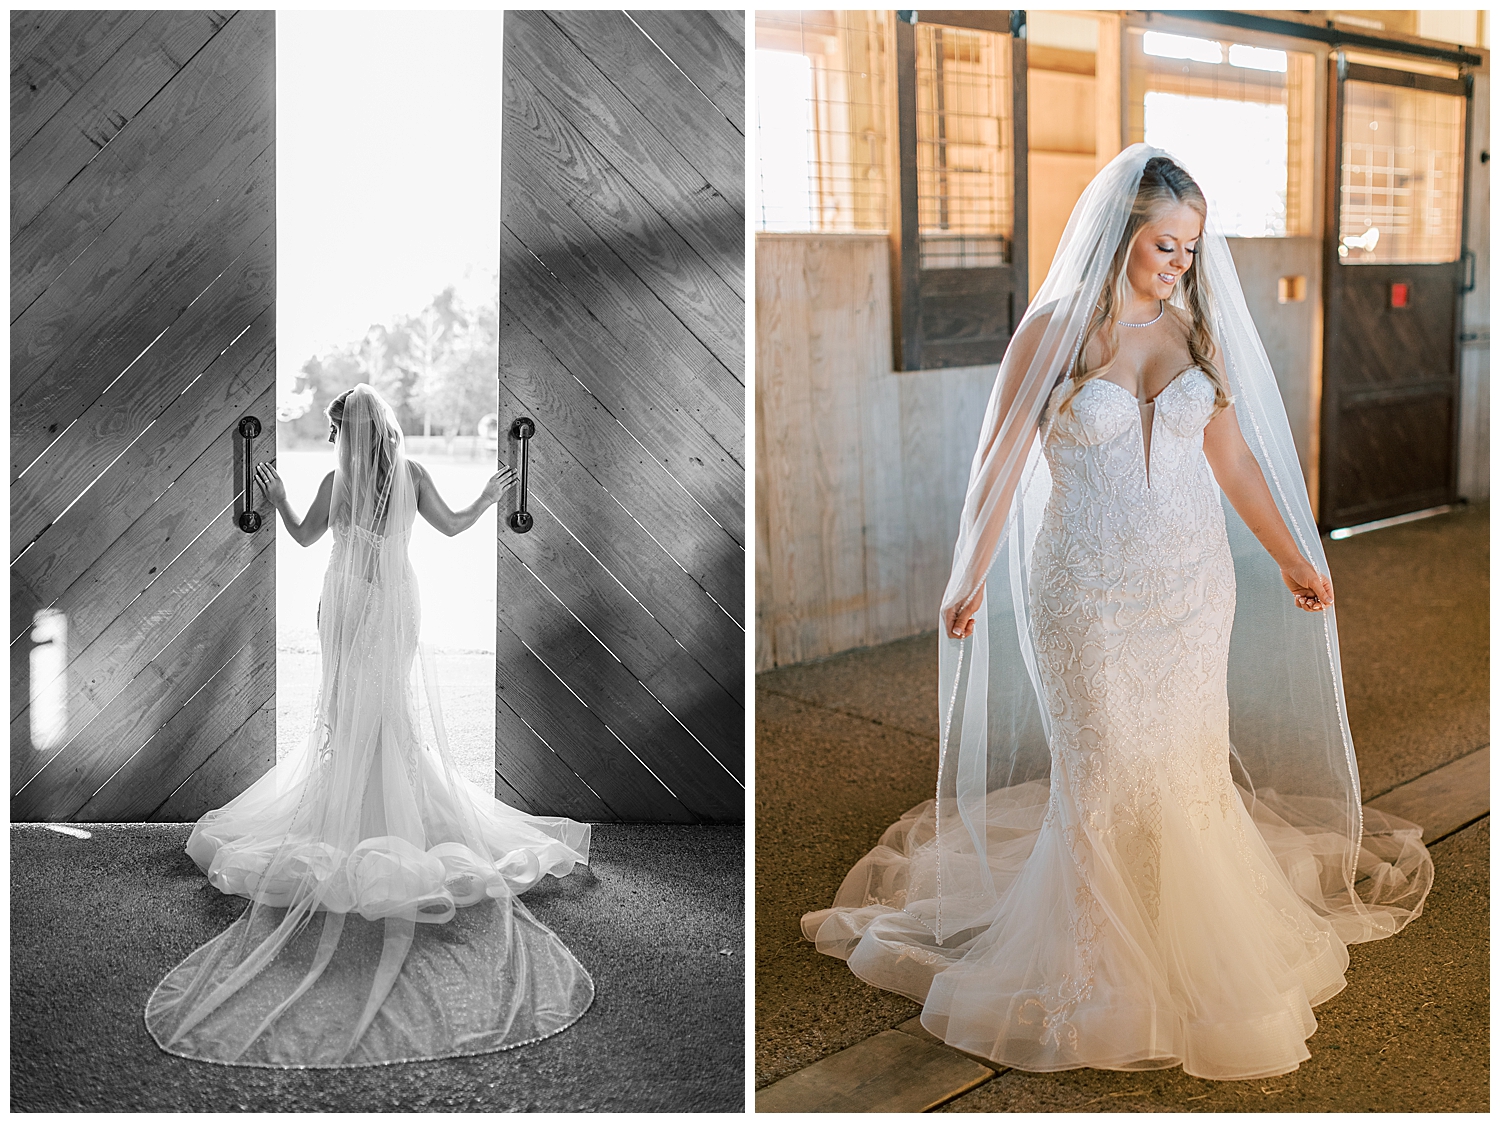 A bride twirls her veil in the stables.